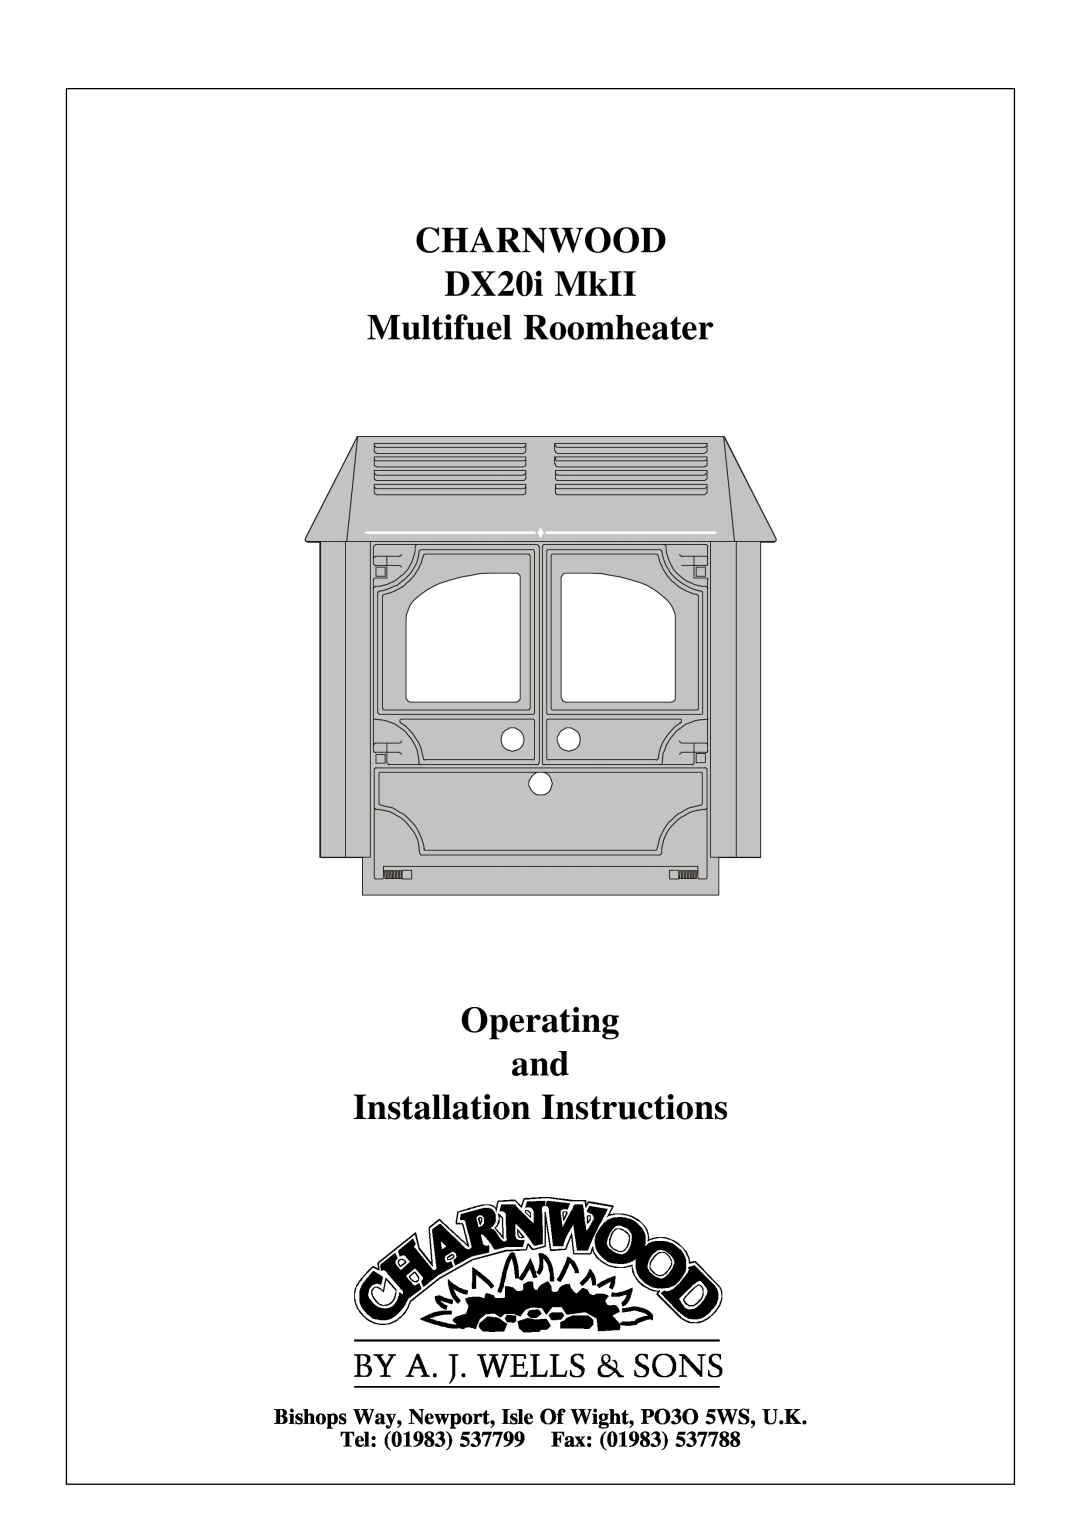 Charnwood installation instructions CHARNWOOD DX20i MkII Multifuel Roomheater Operating and, Installation Instructions 